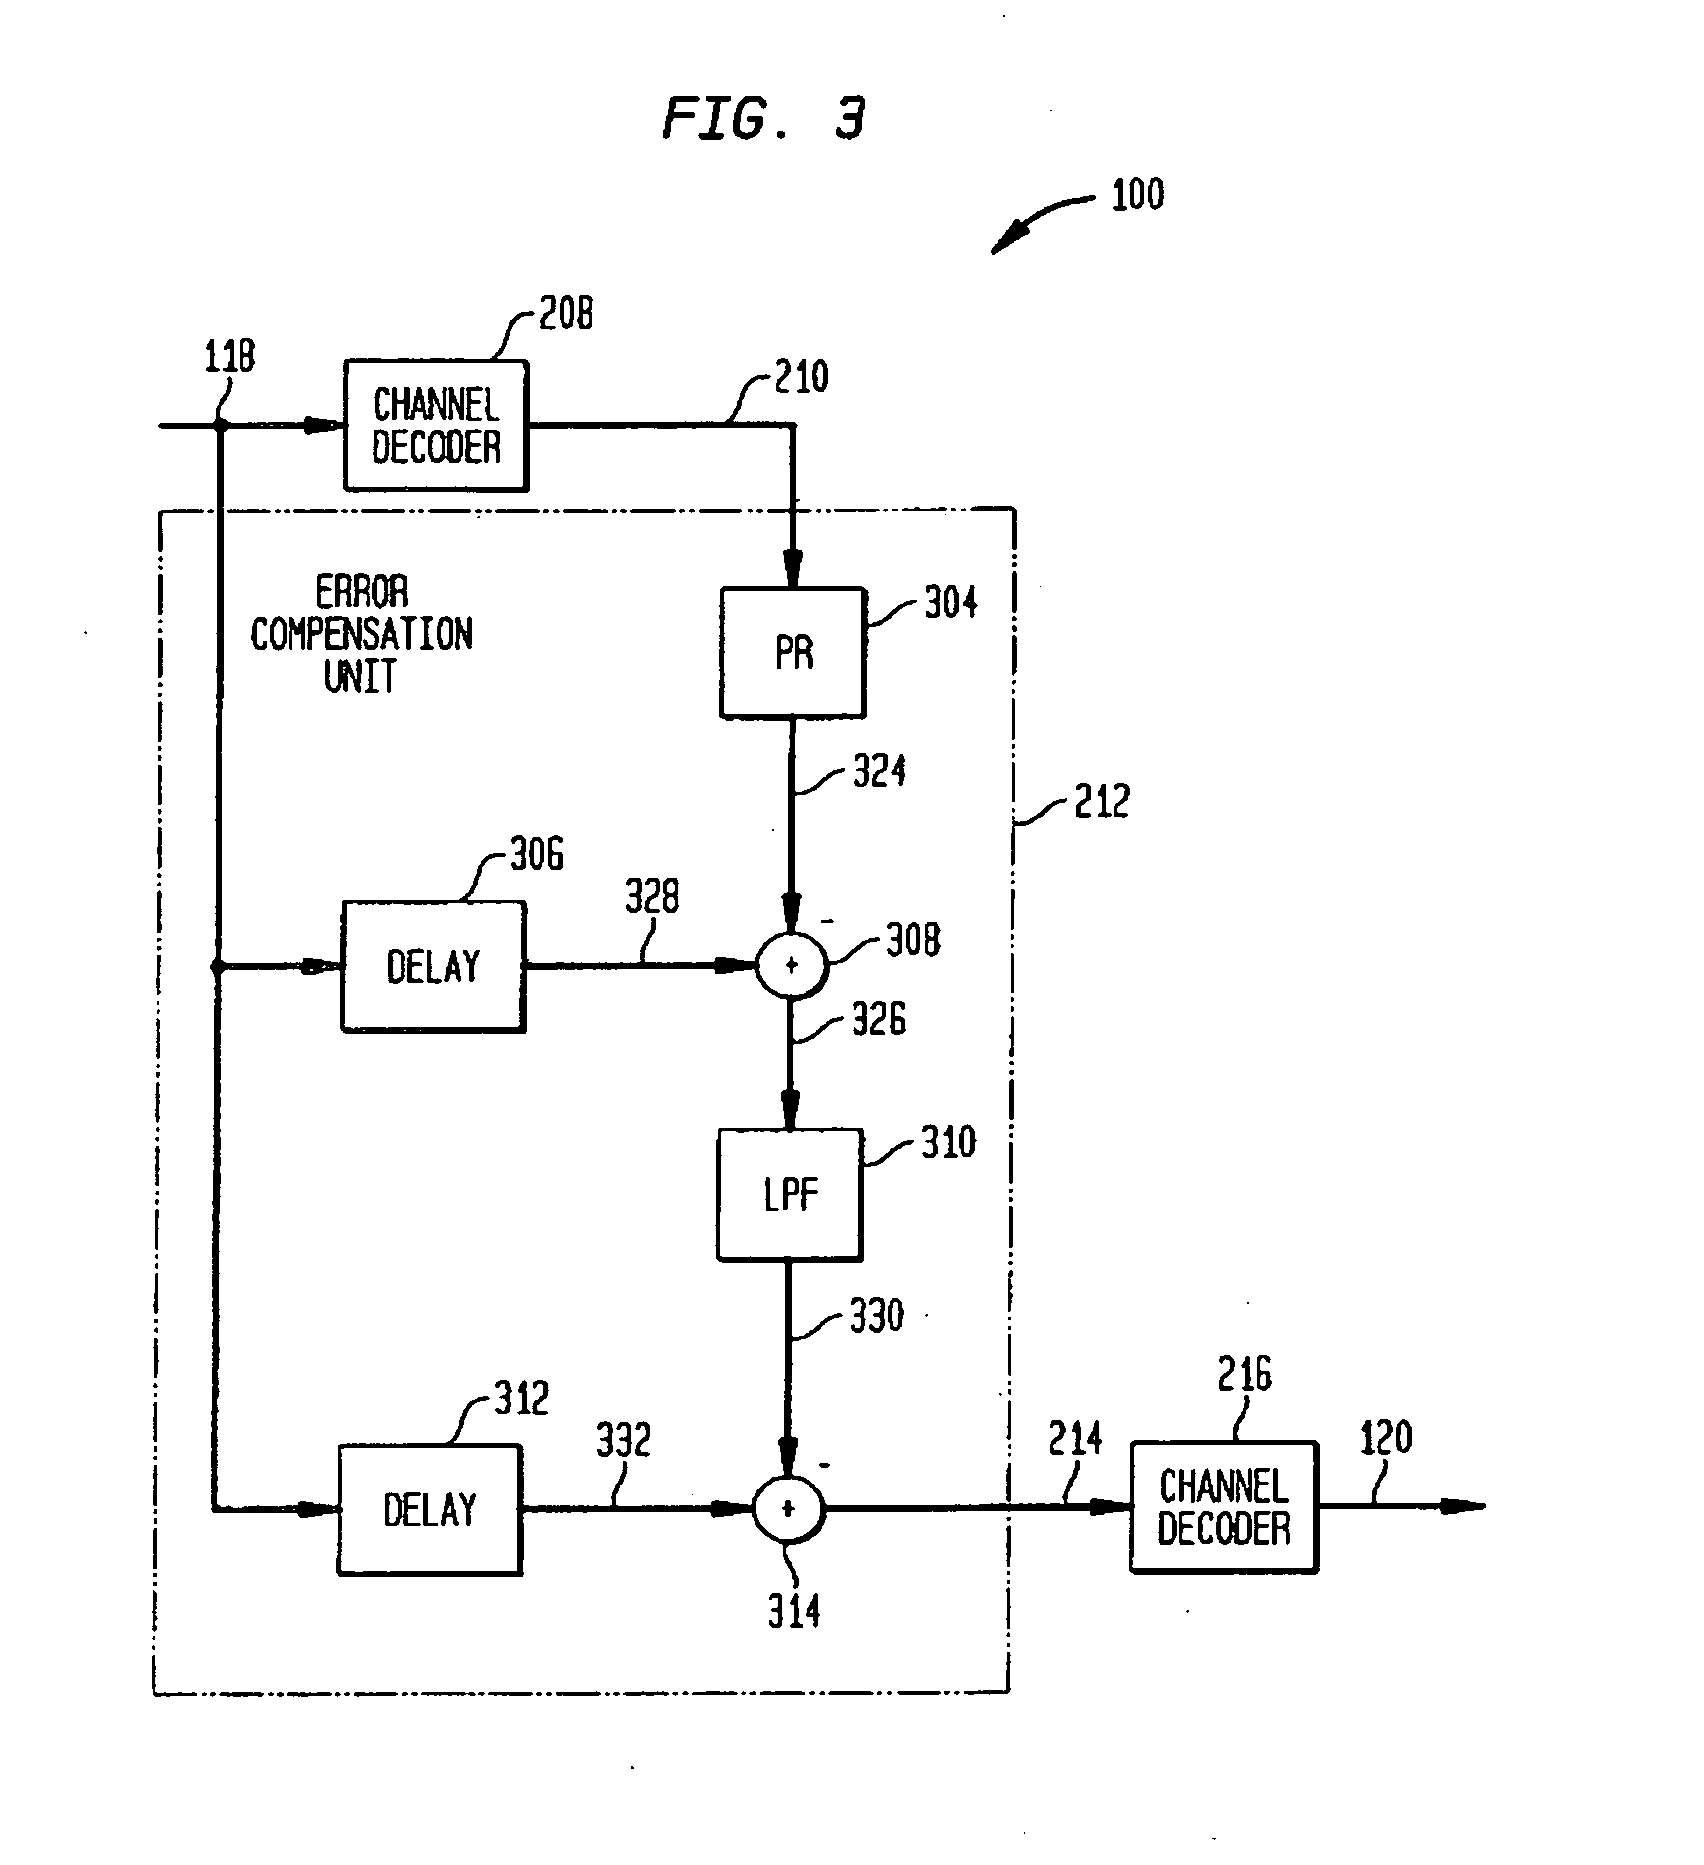 Method and Apparatus for Error Compensation